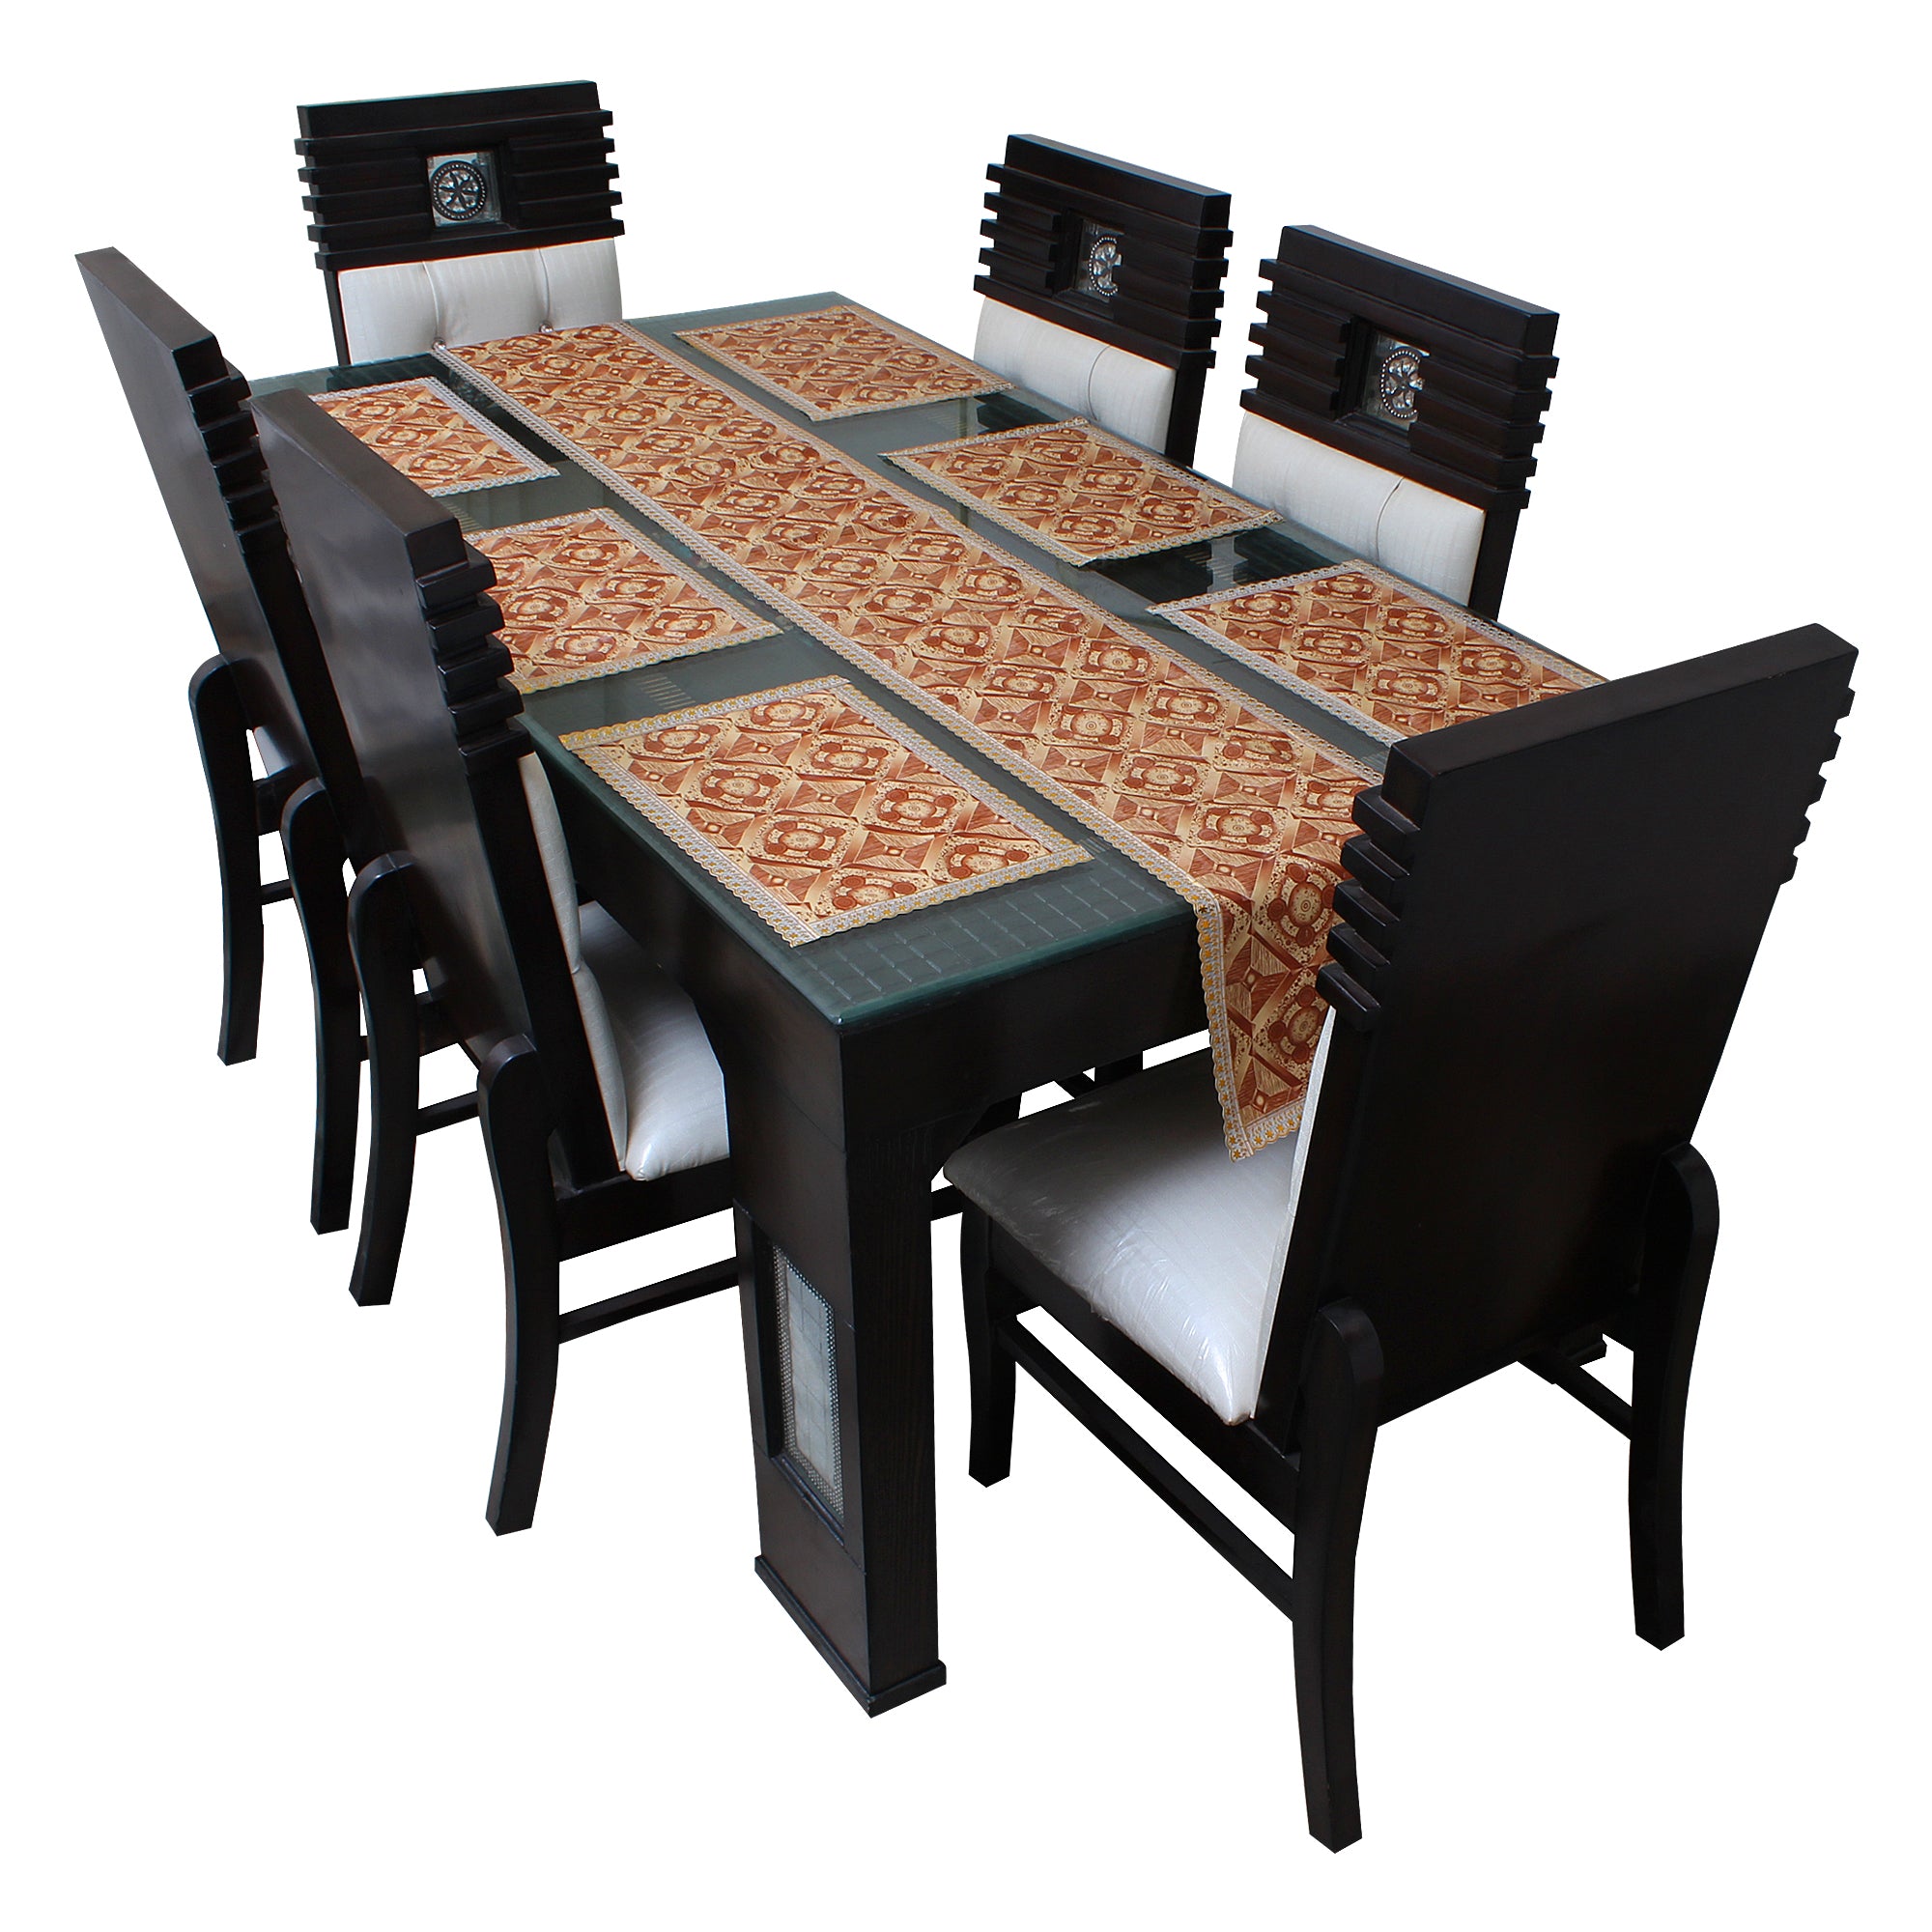 Waterproof & Dustproof Dining Table Runner With 6 Placemats, SA54 - Dream Care Furnishings Private Limited